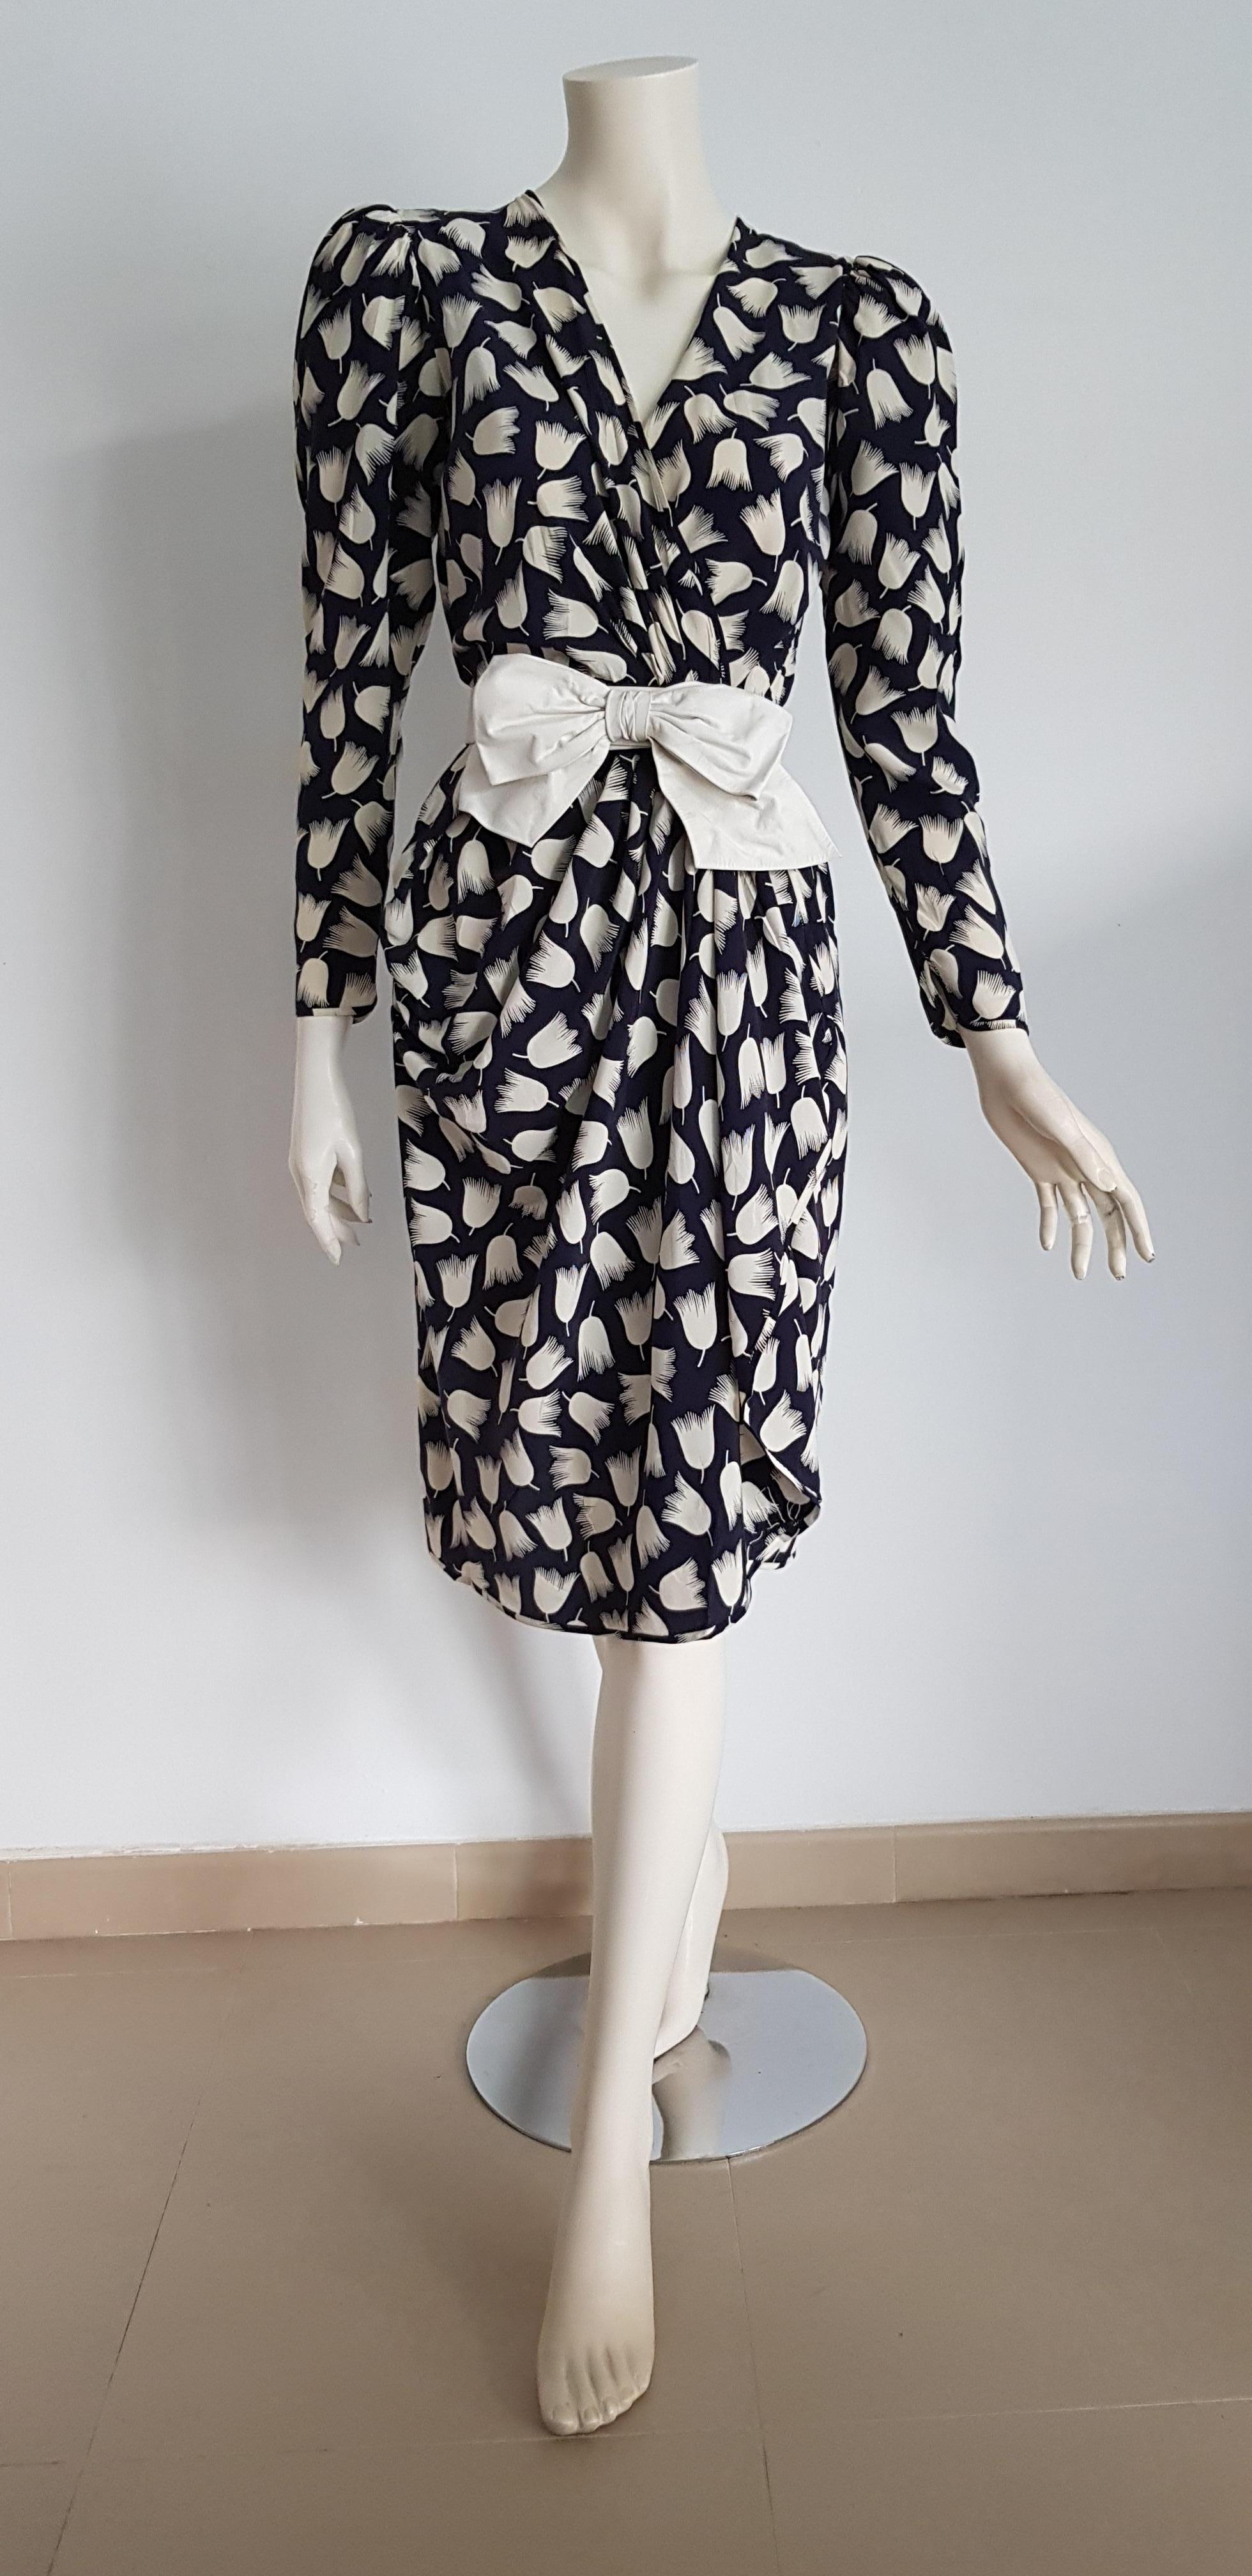 VALENTINO Haute Couture, black, white tulips belt with bow, silk dress - Unworn, New.

SIZE: equivalent to about Small / Medium, please review approx measurements as follows in cm: lenght 108, chest underarm to underarm 50, bust circumference 91,